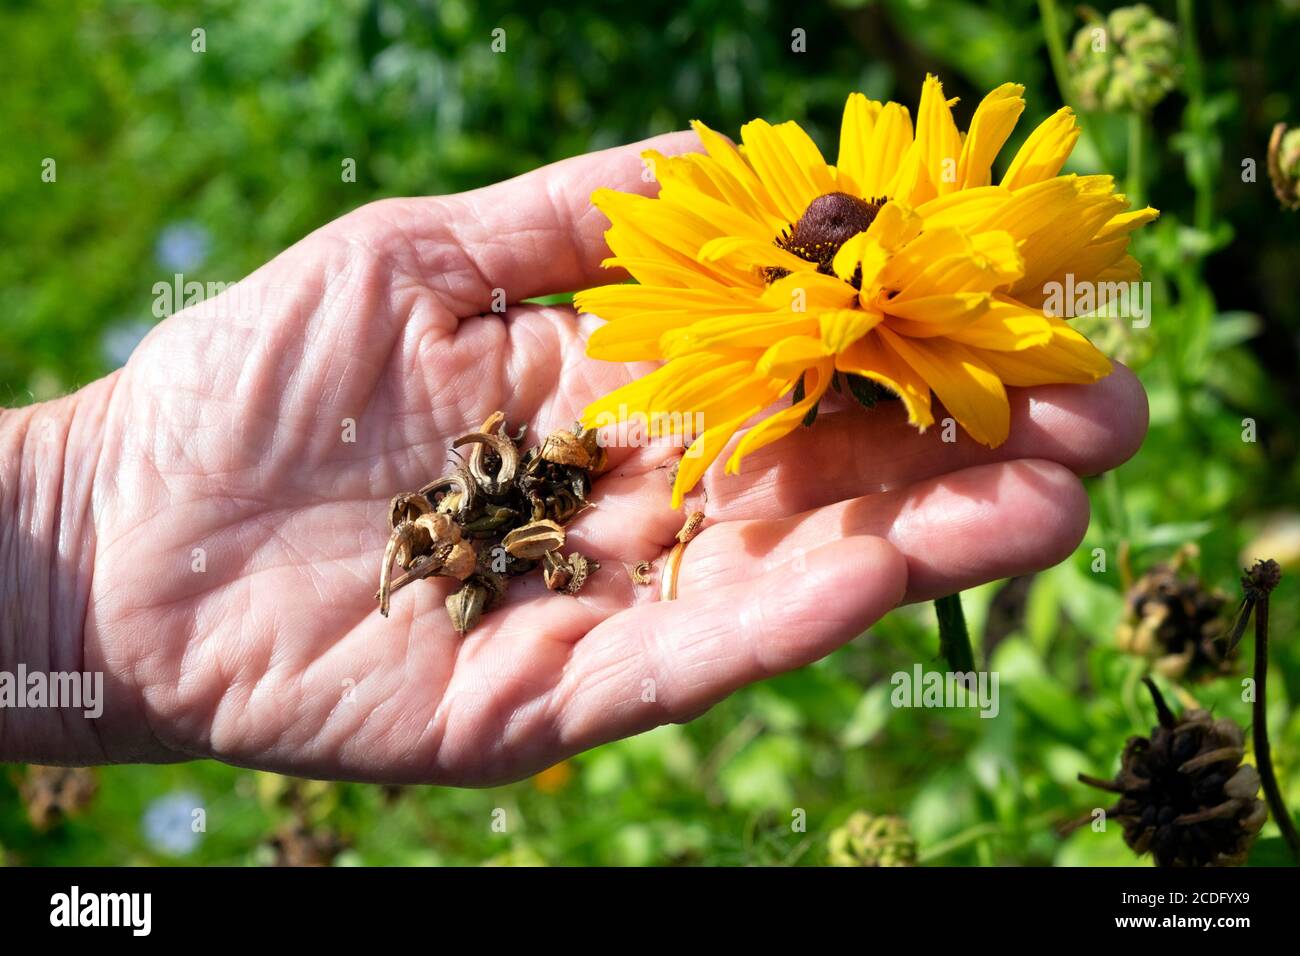 A woman holding out hand collecting harvesting seeds in flower garden growing rudbeckia in late summer August Carmarthenshire Wales UK KATHY DEWITT Stock Photo